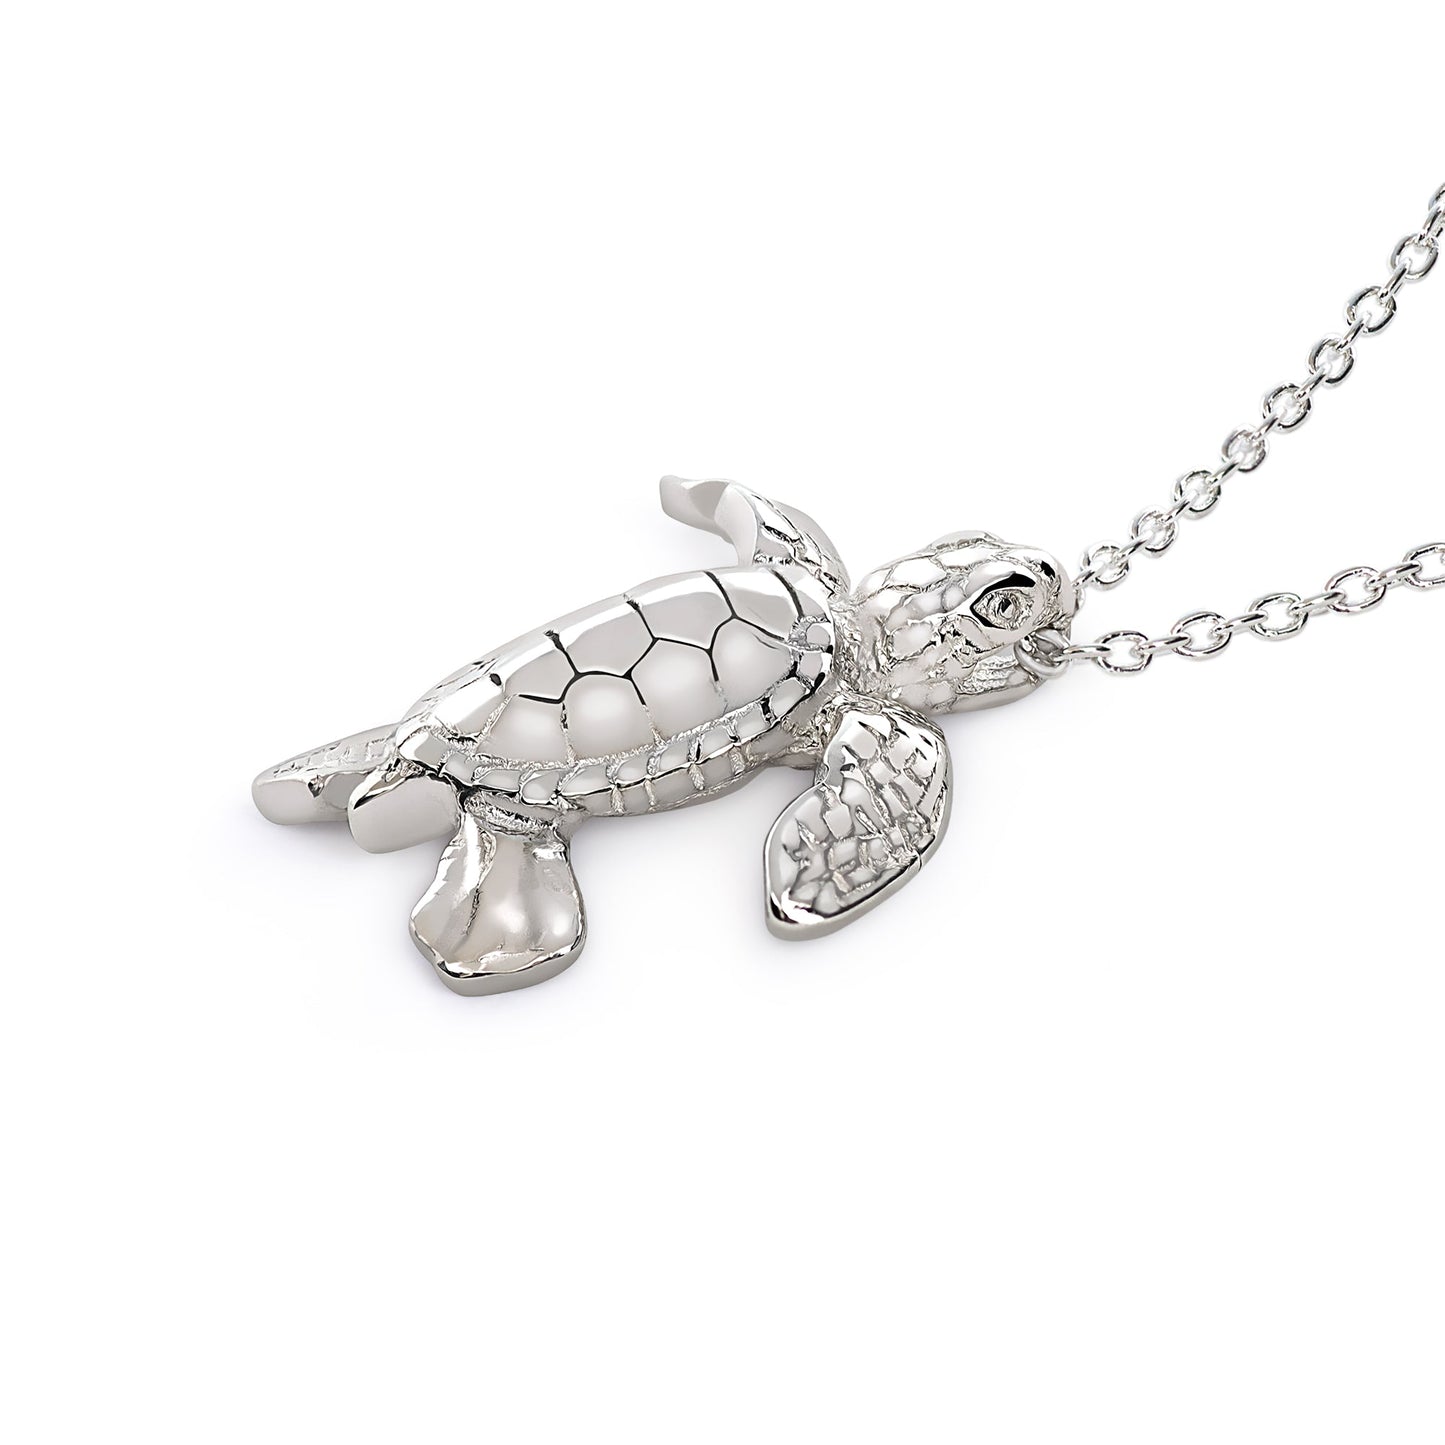 Turtle Necklace Sterling Silver- Miniature Turtle Pendant, Sea Turtle Gifts, Sterling Silver Turtle Charm Necklace, Gifts for Turtle Lovers - The Tool Store